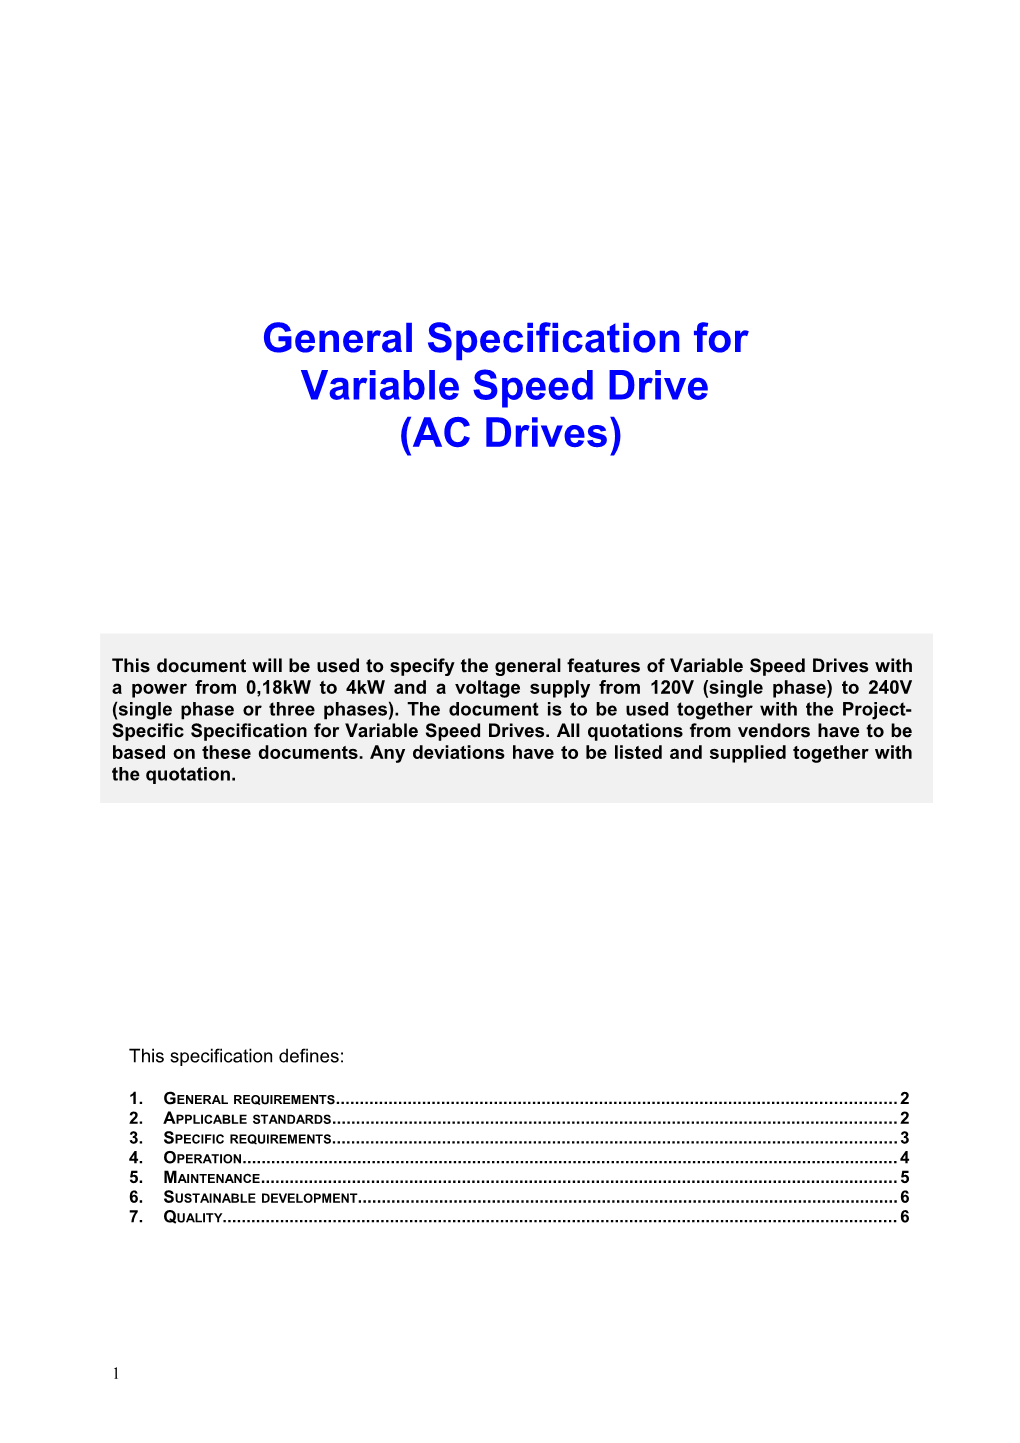 Specification for Variable Speed Drives (VSD)